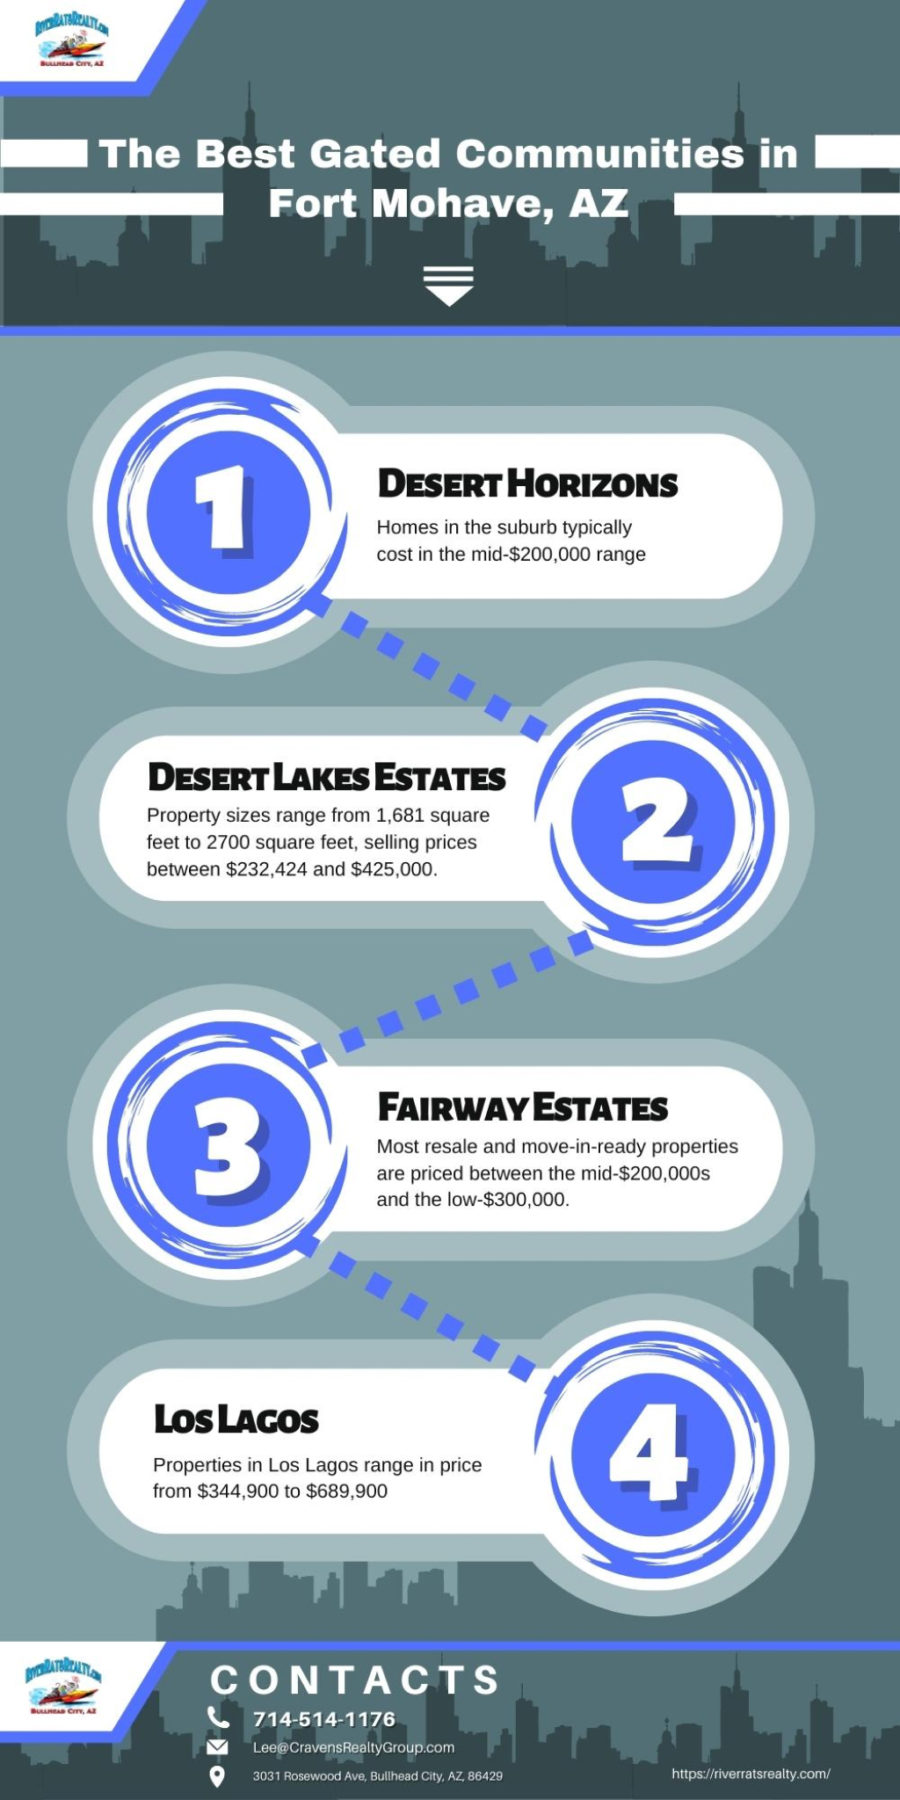 The Best Gated Communities in Fort Mohave, AZ